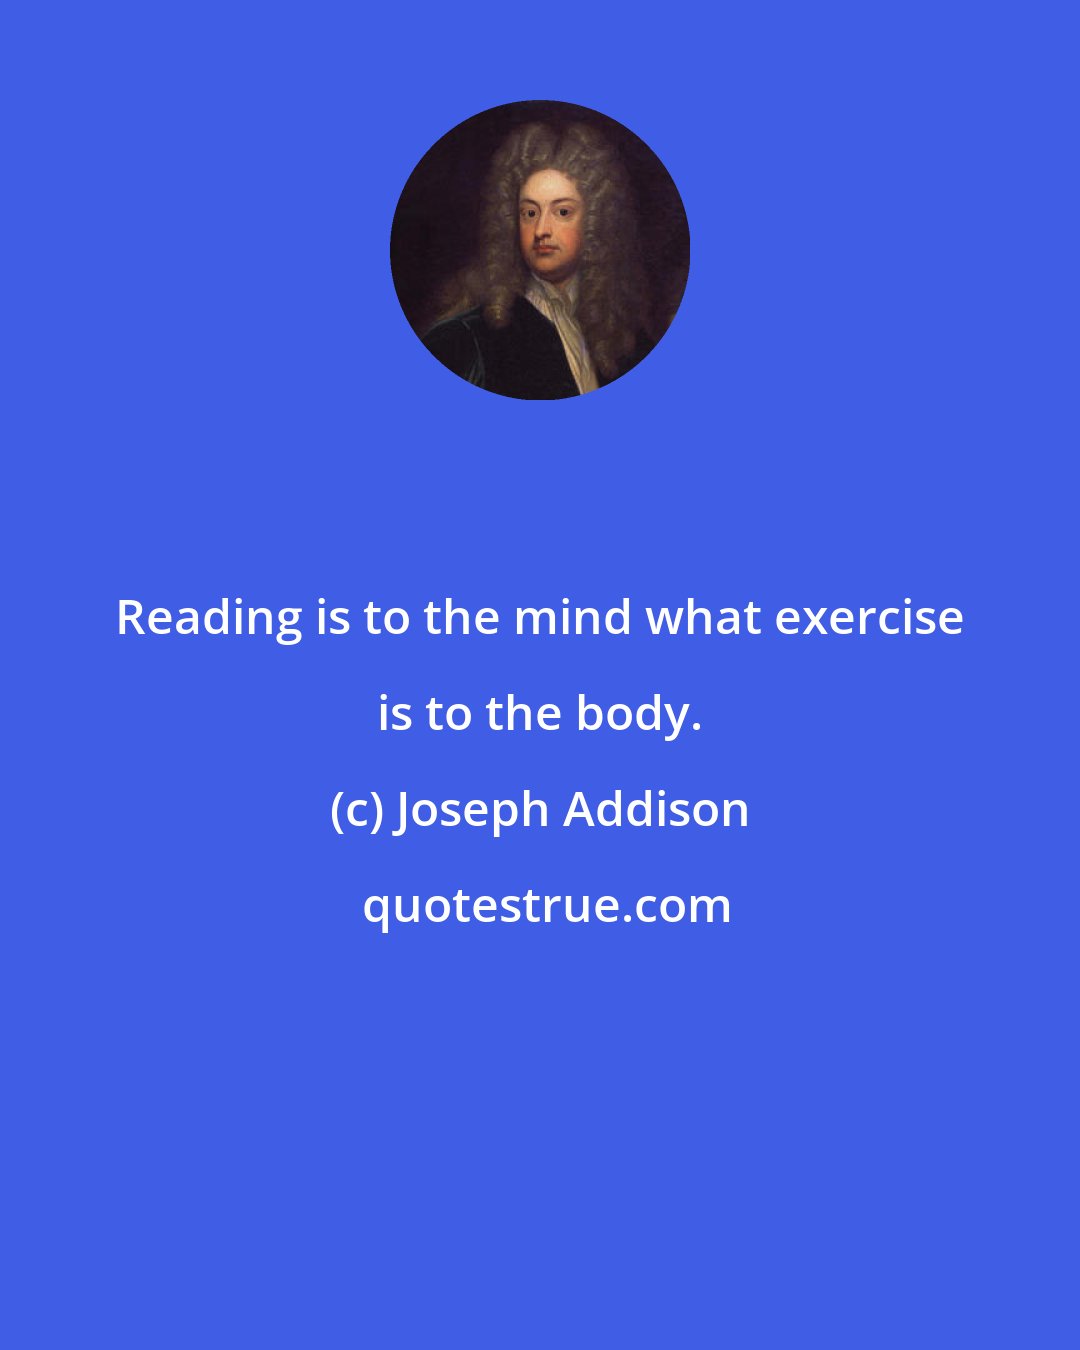 Joseph Addison: Reading is to the mind what exercise is to the body.